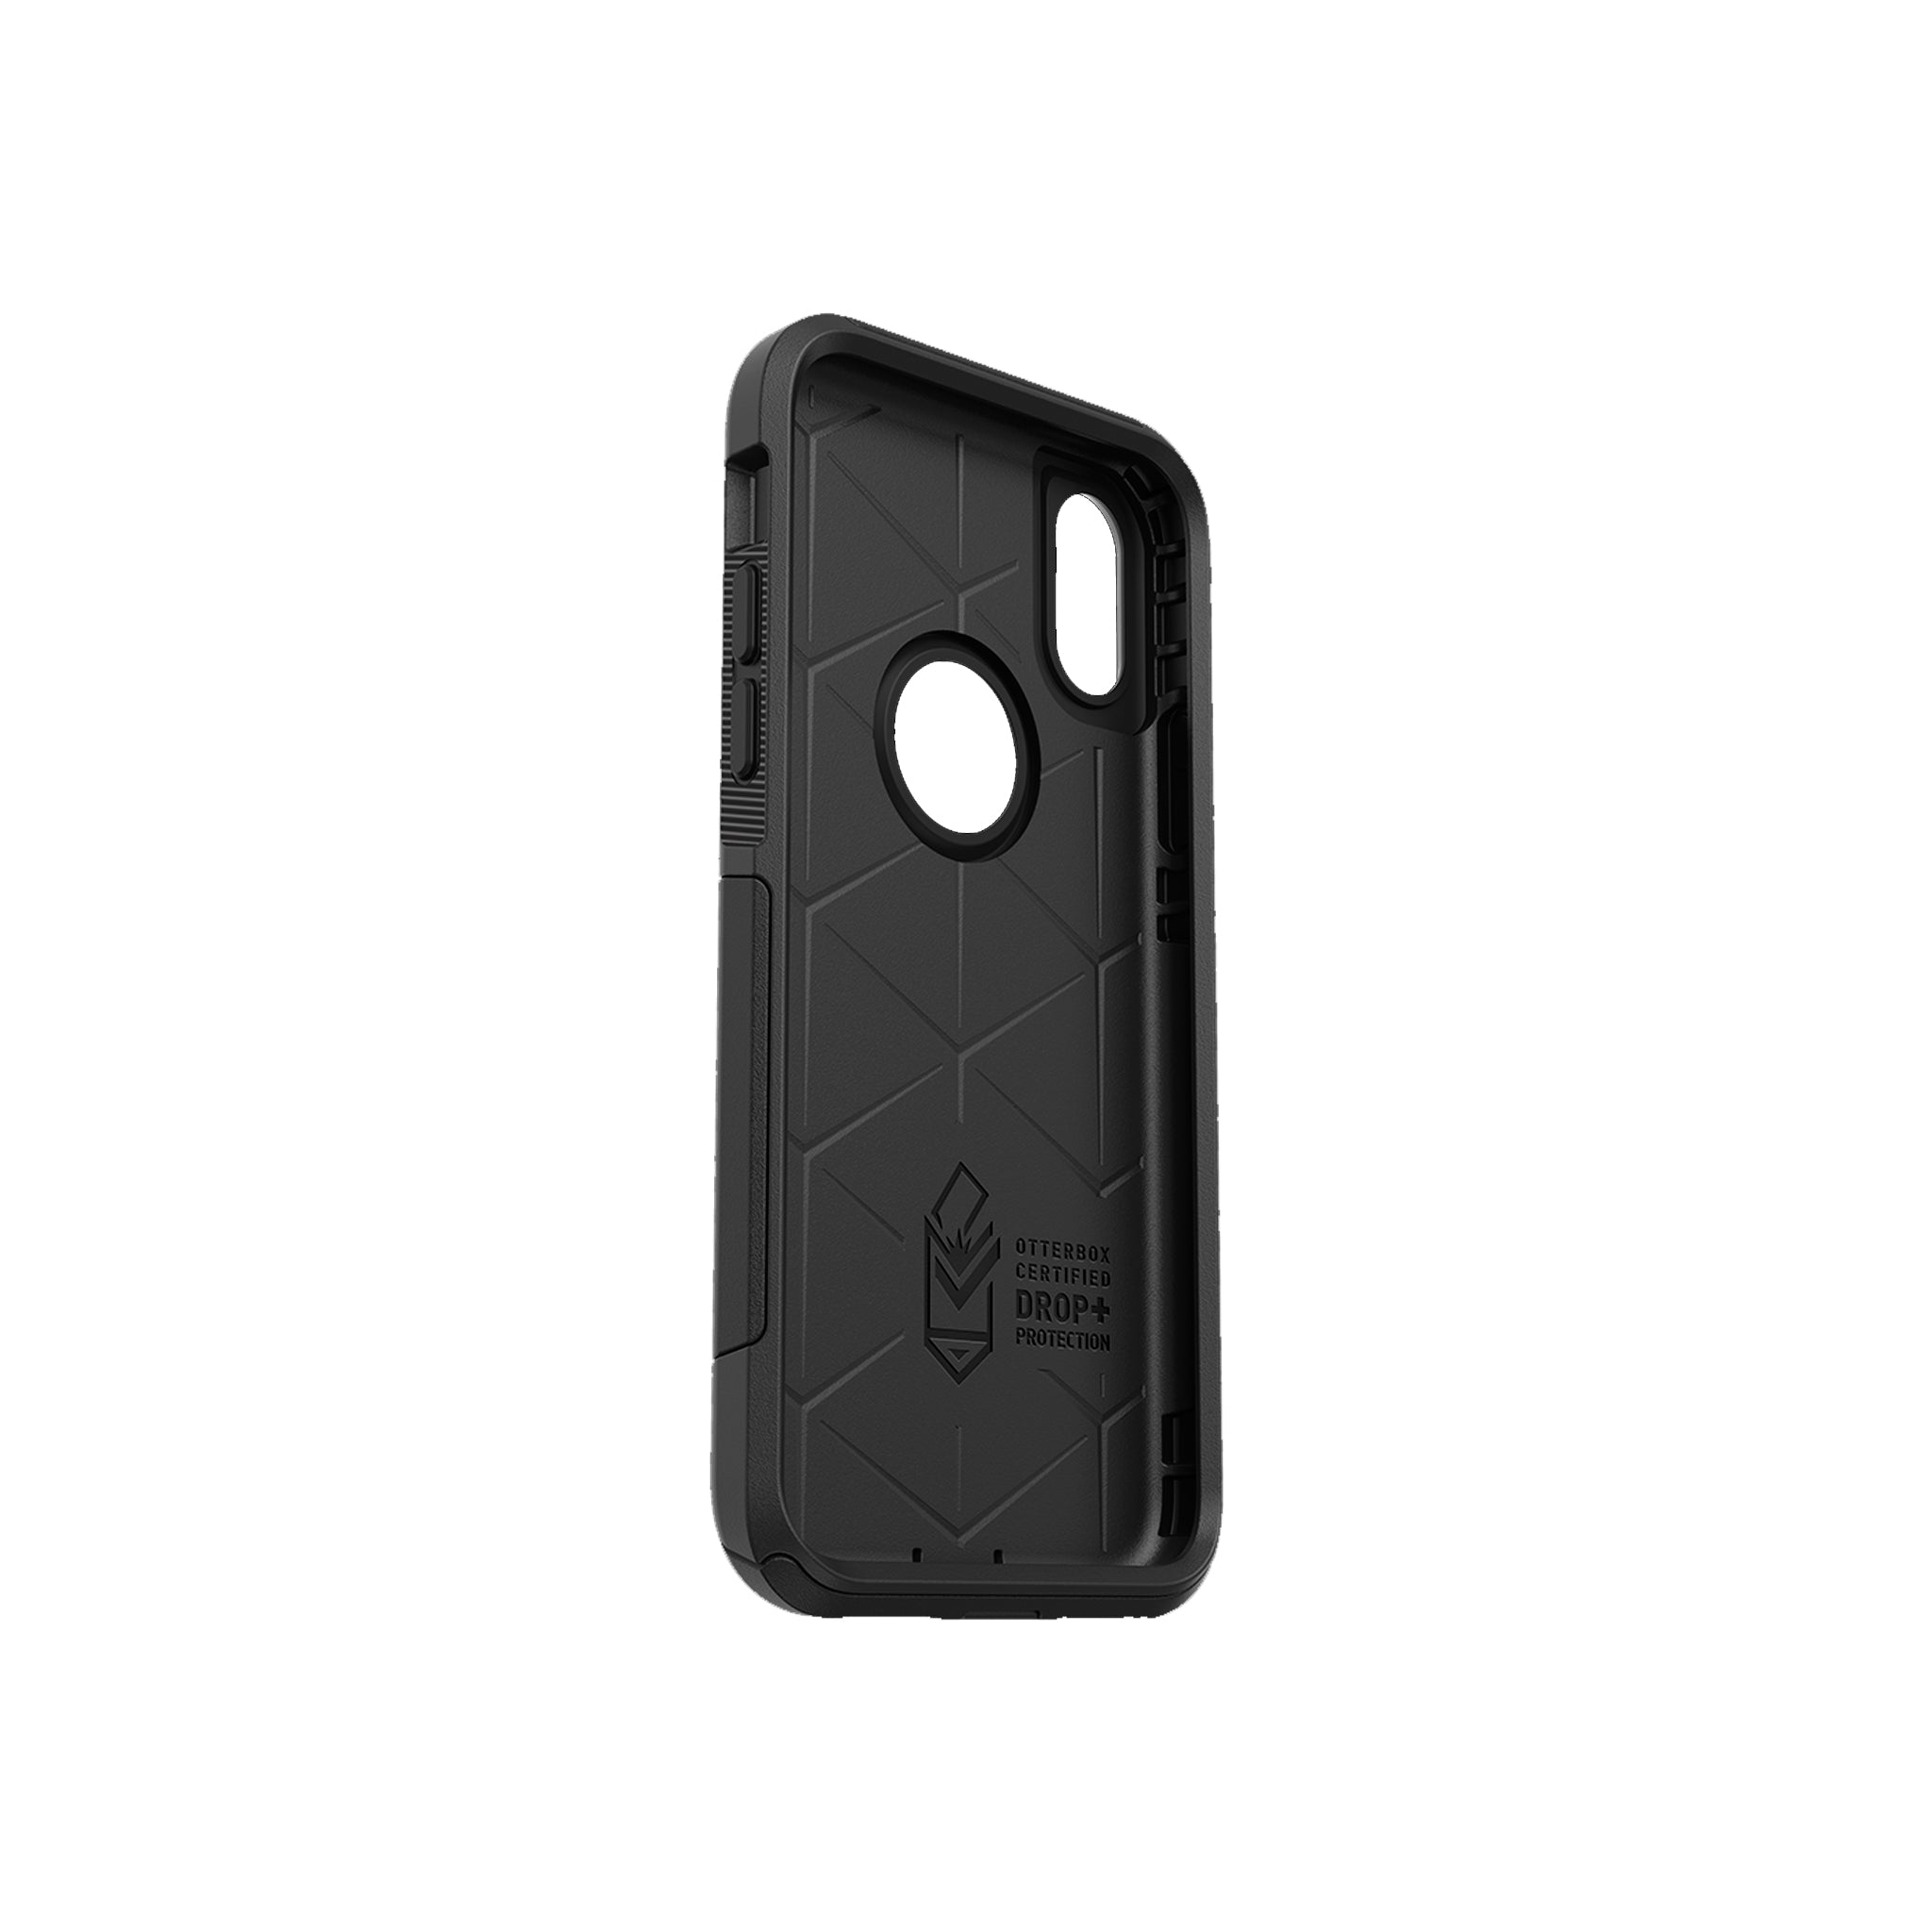 OtterBox - Commuter Serie Case for iPhone X/XS - Black